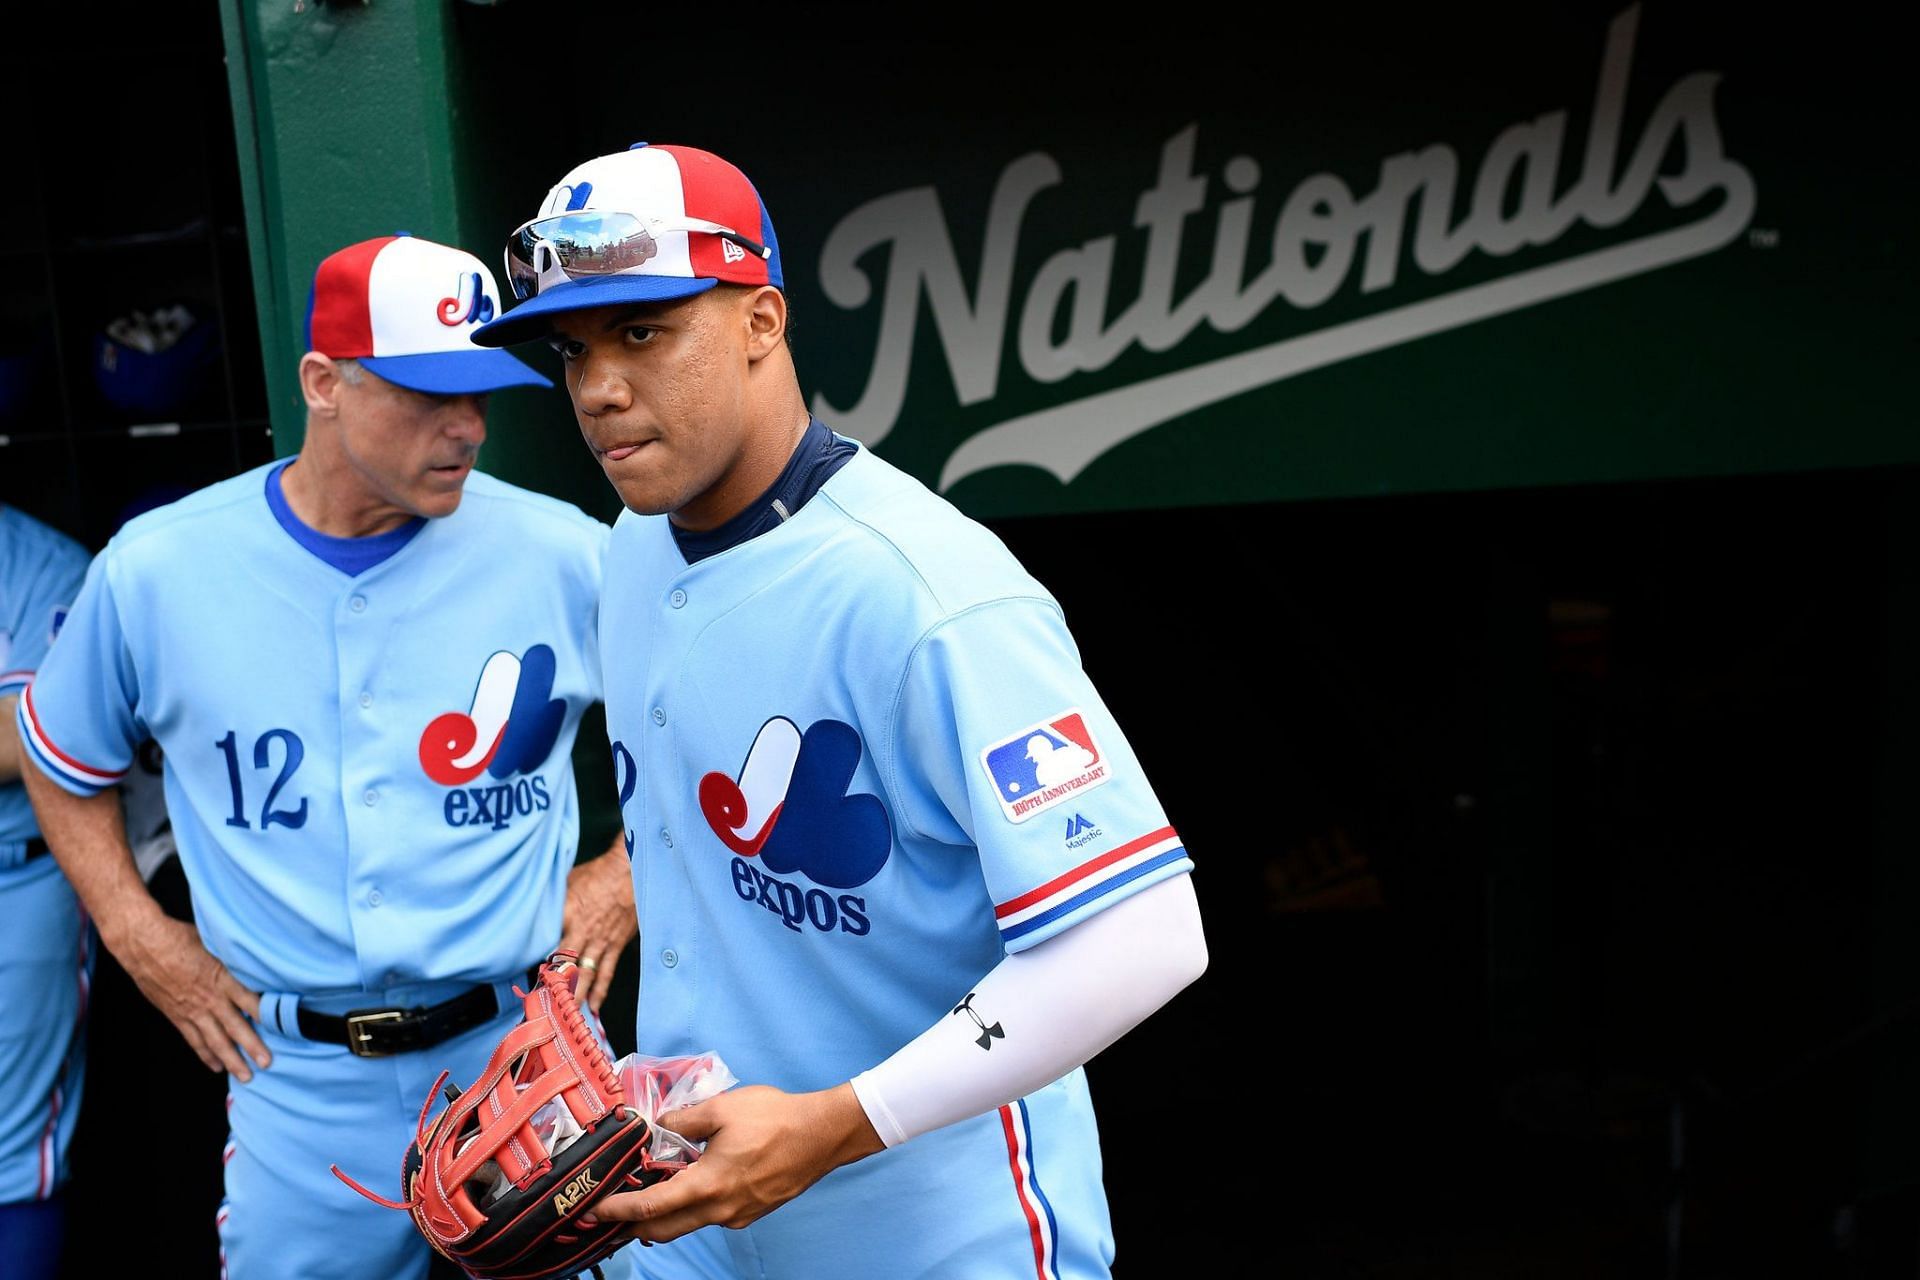 Montreal Expos fans are dealing with the Washington Nationals in